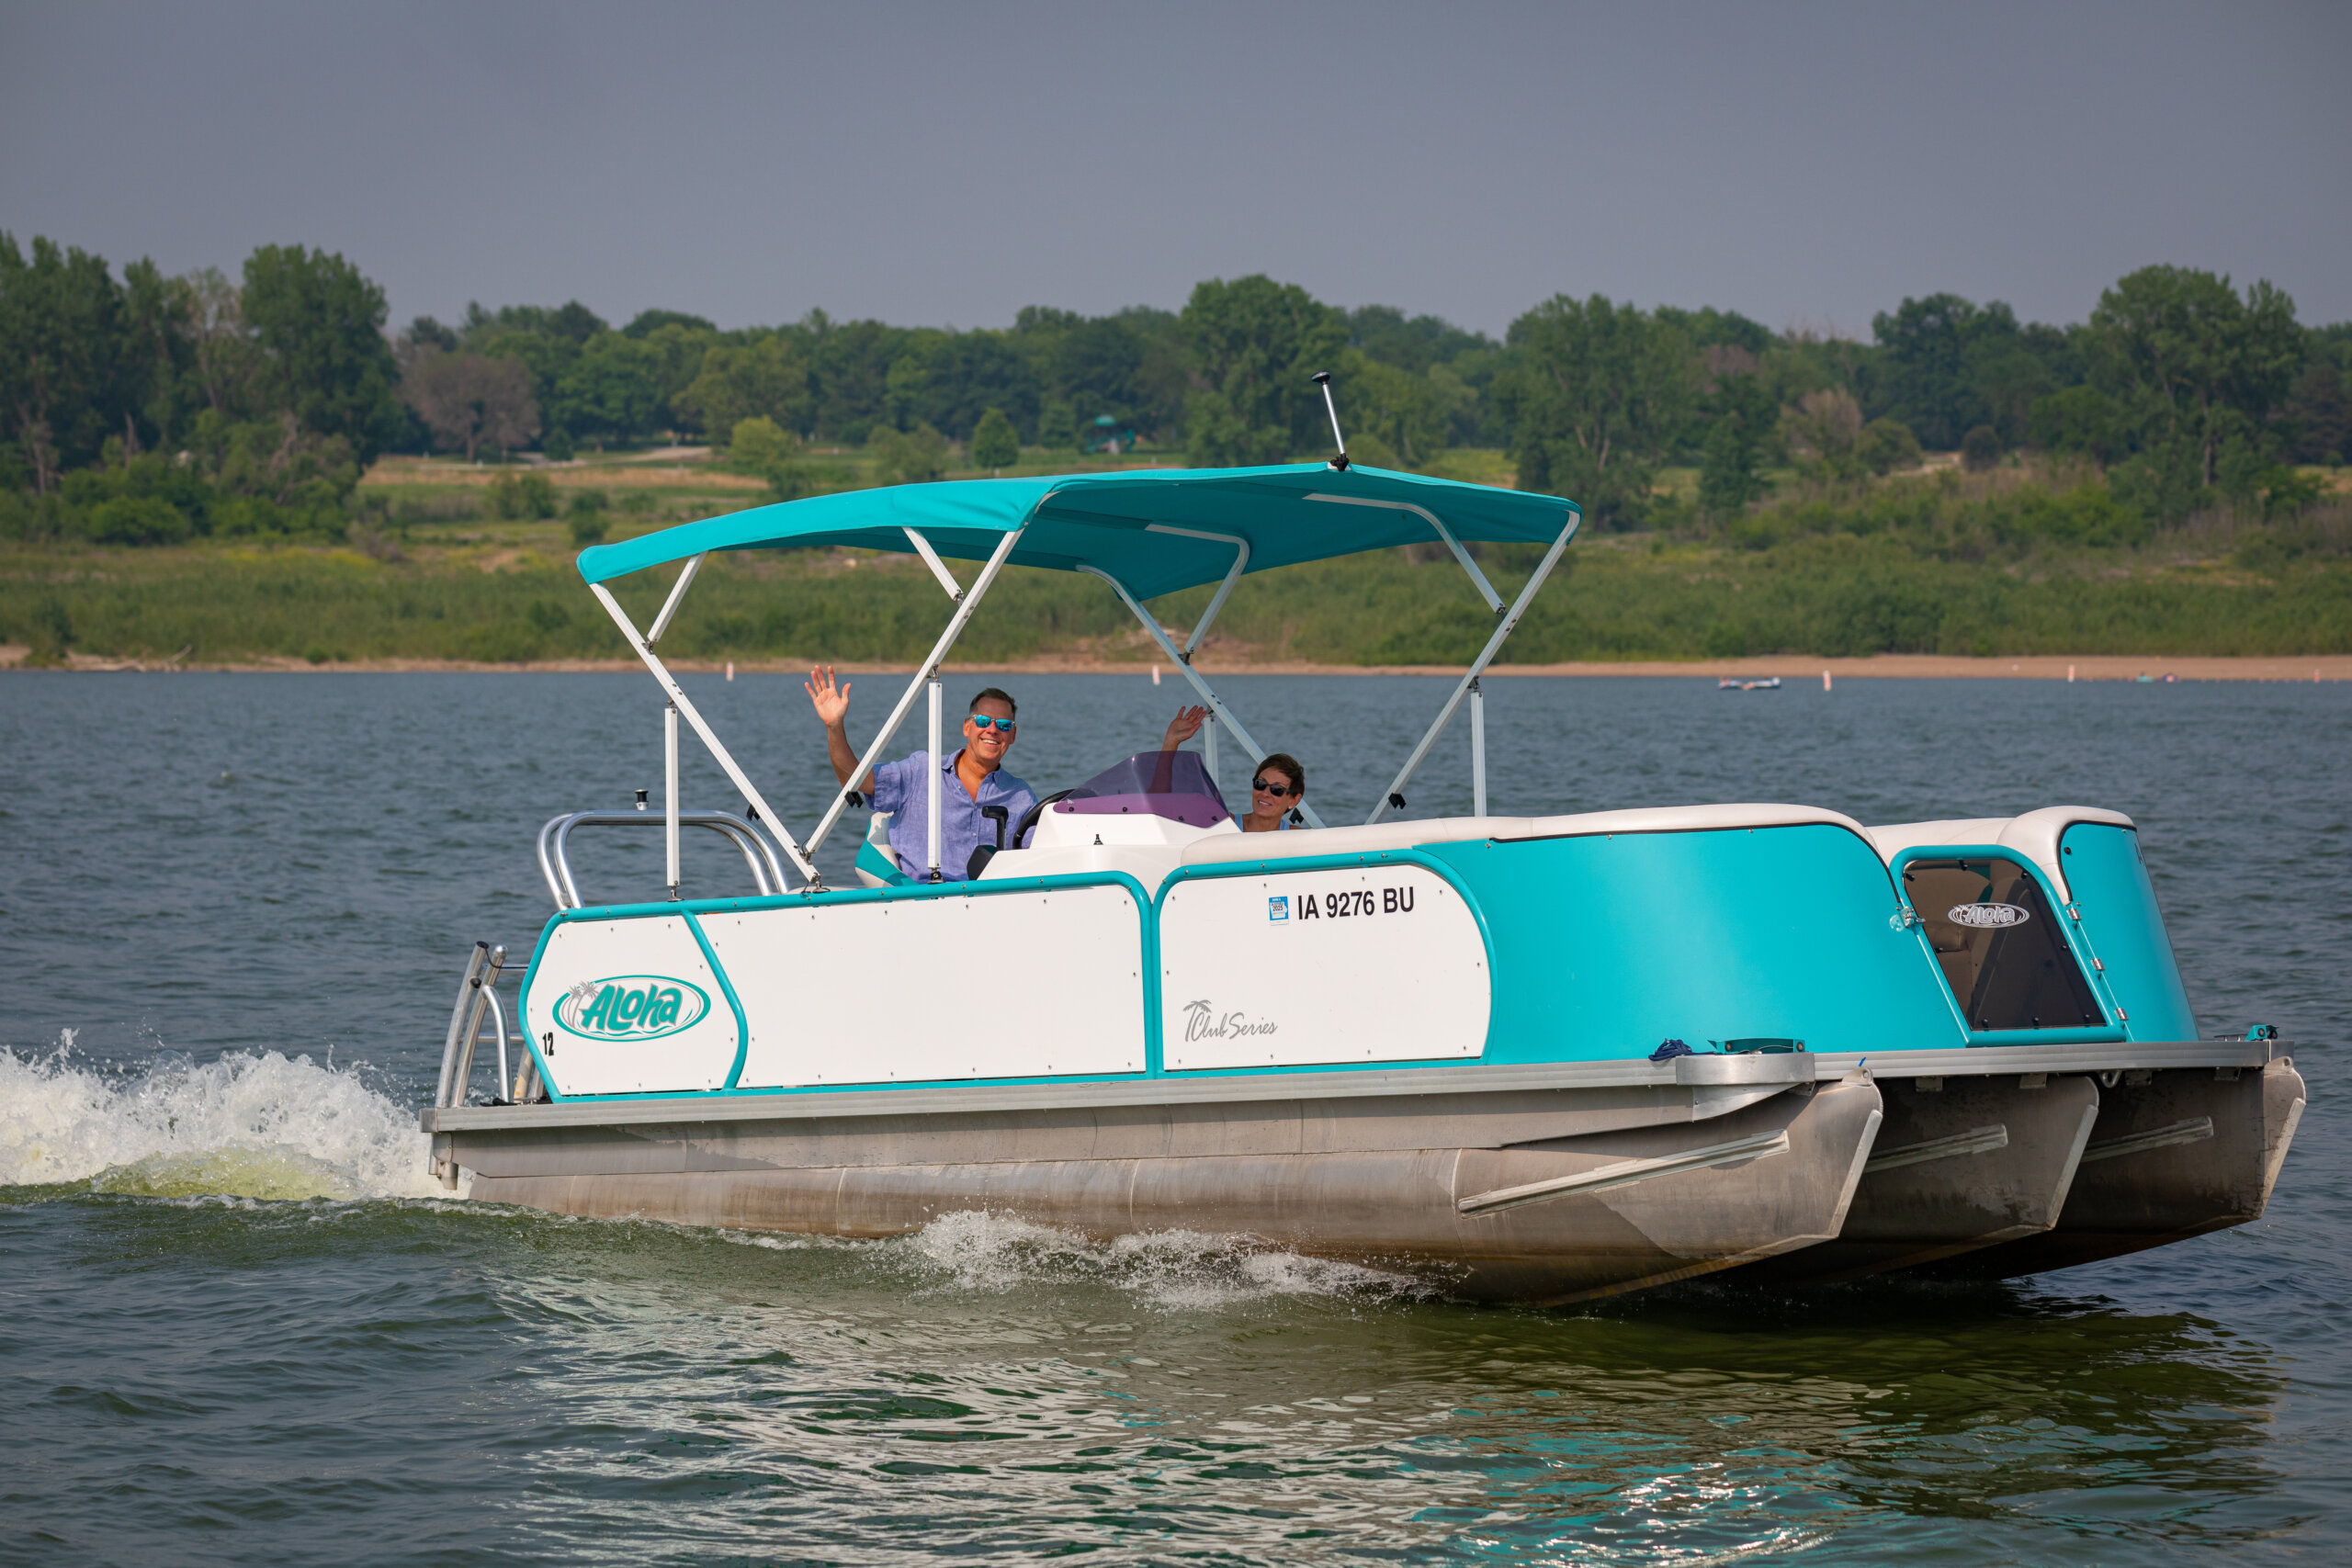 Cruise and enjoy the beauty of Des Moines River